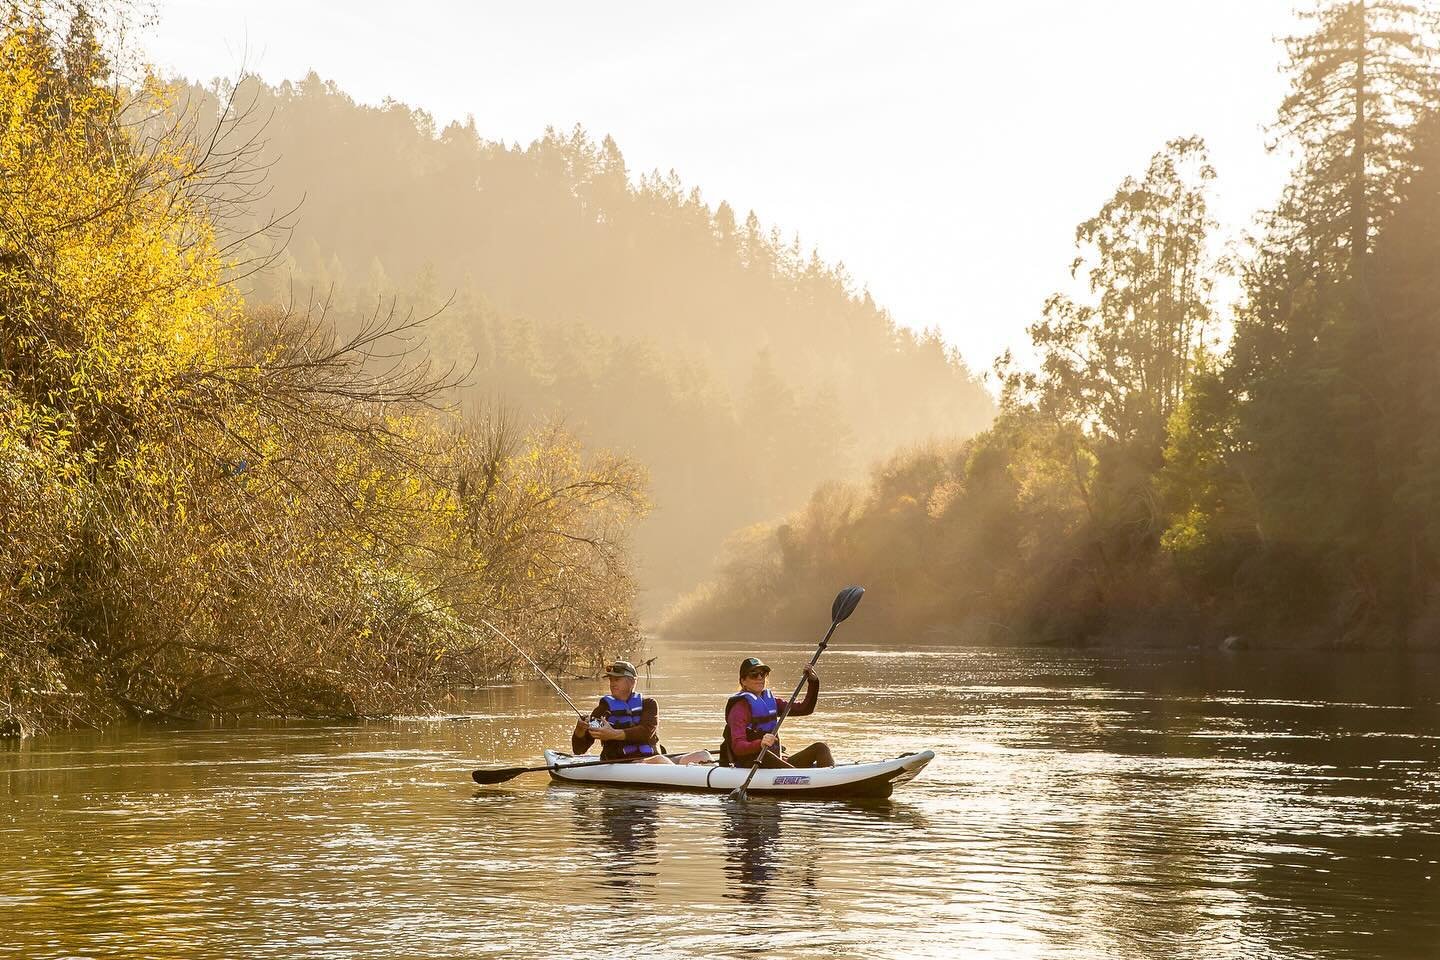 Hazy shades of yellow for this @seaeagleboats shoot I did a few years back in January on the Russian river with talented fish expert friend @keithfoxe and his wife Christa.
.
.
.
.
.
.
#sunsetmag #nakedplanet #mytinyatlas#exploreobserveshare #frenchr